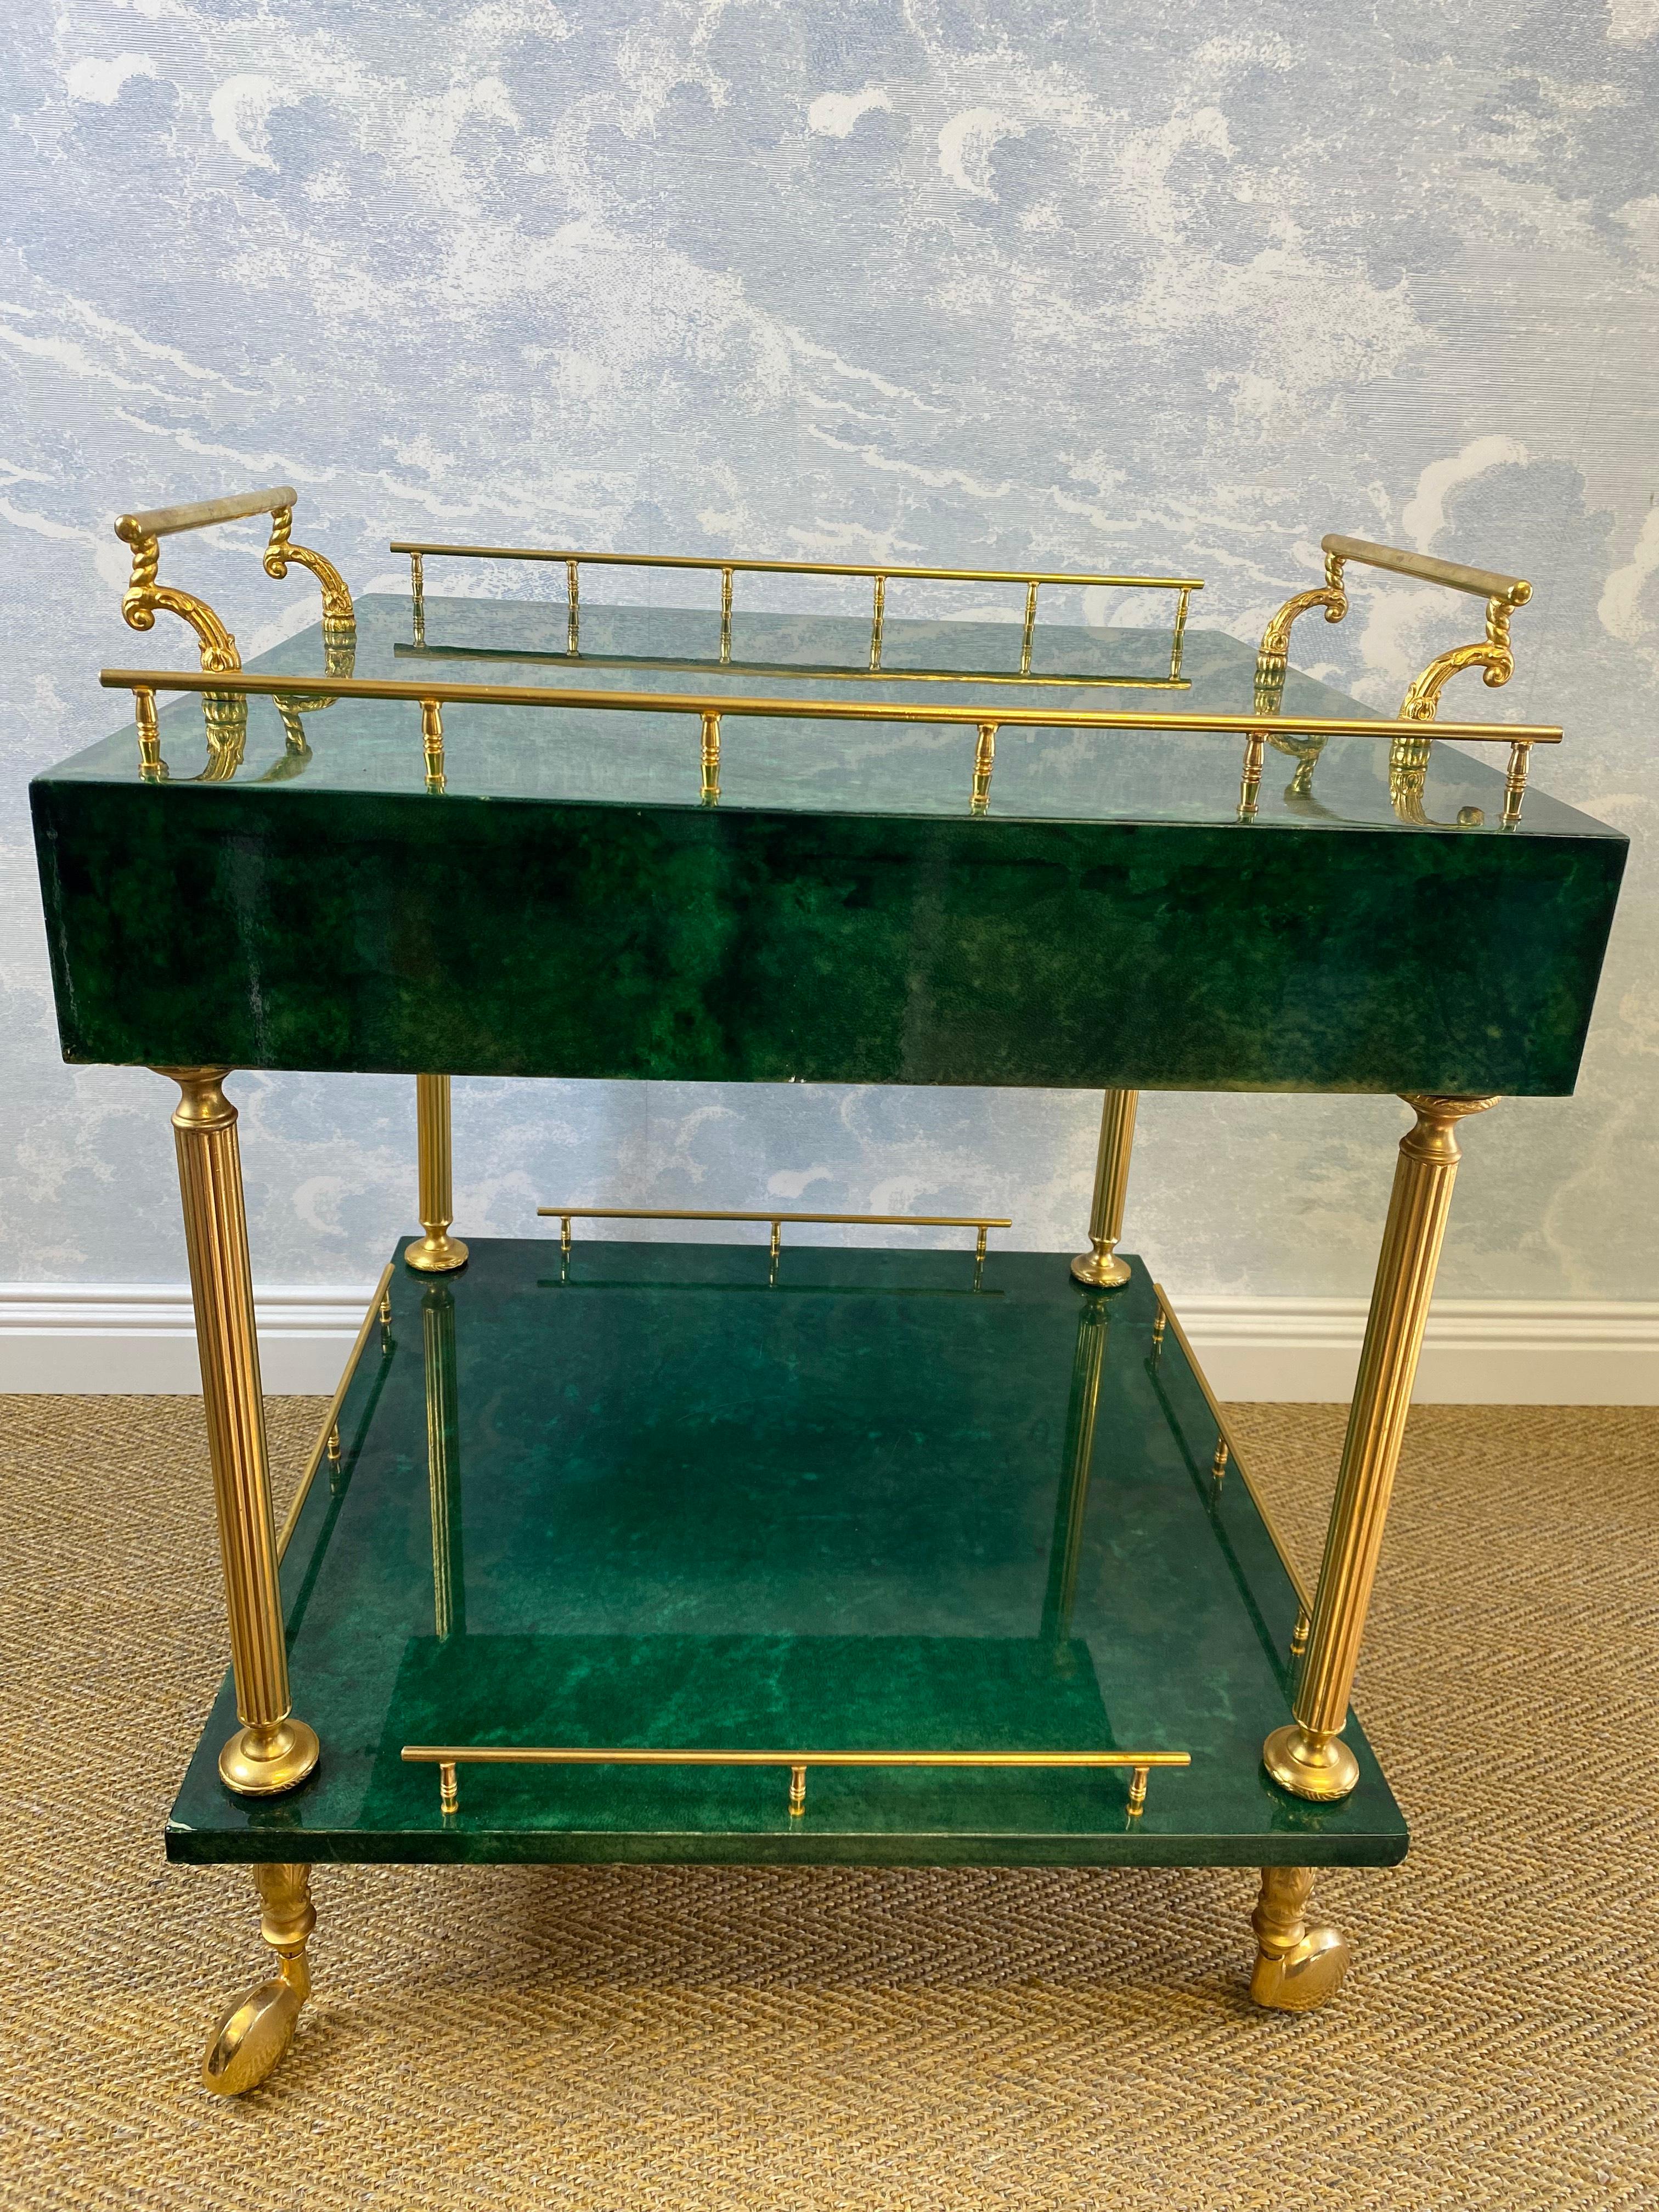 This original ALDO TURA coffee table or side table also makes a great tea trolly / bar cart as it is set on wheels and comes with two handles.

With its distinctive and sleek design this ALDO TURA table was designed in Milano, Italy in the 1960's